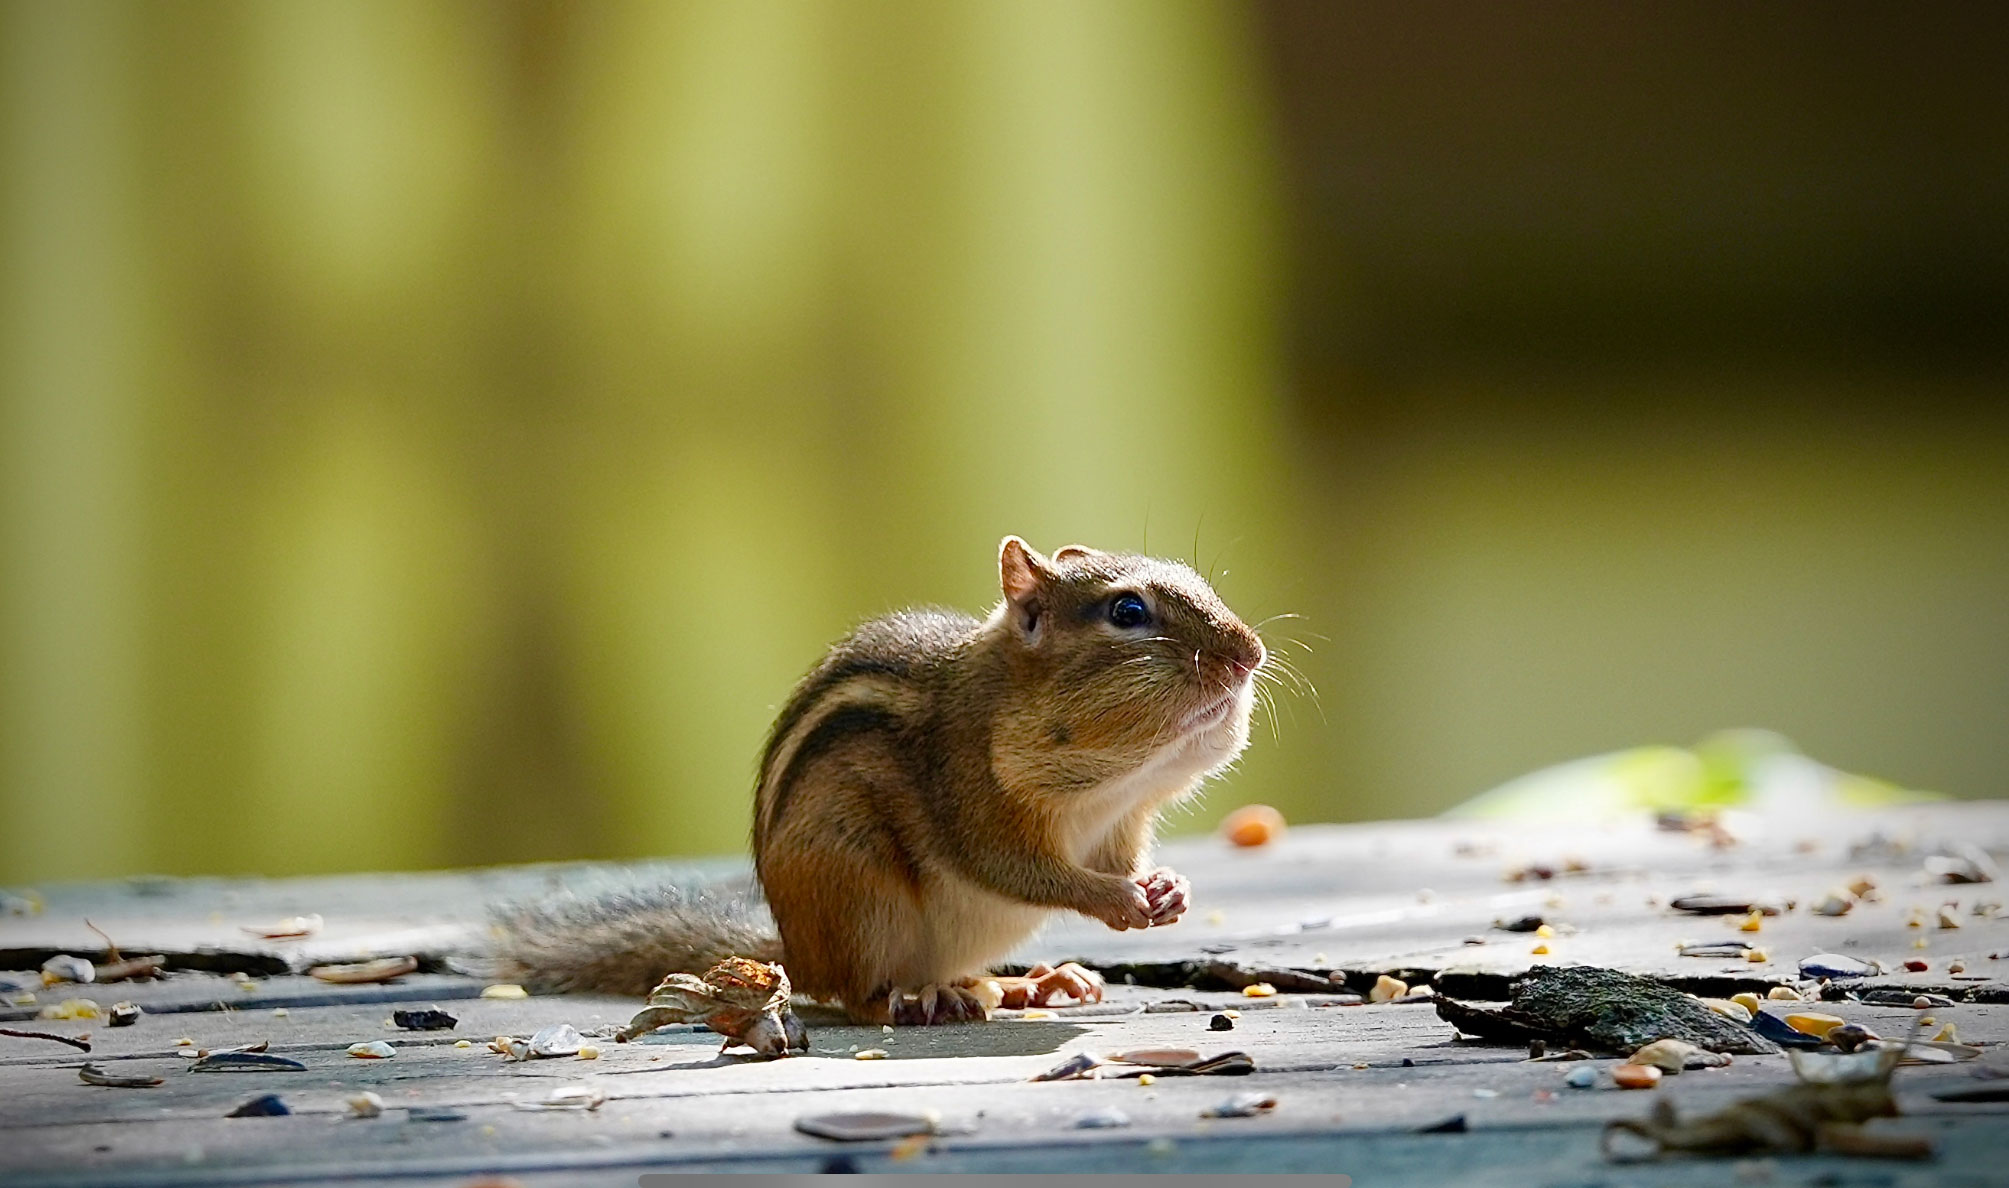 Photo for: Charming Chipmunk Chosen for October Photo Contest Win